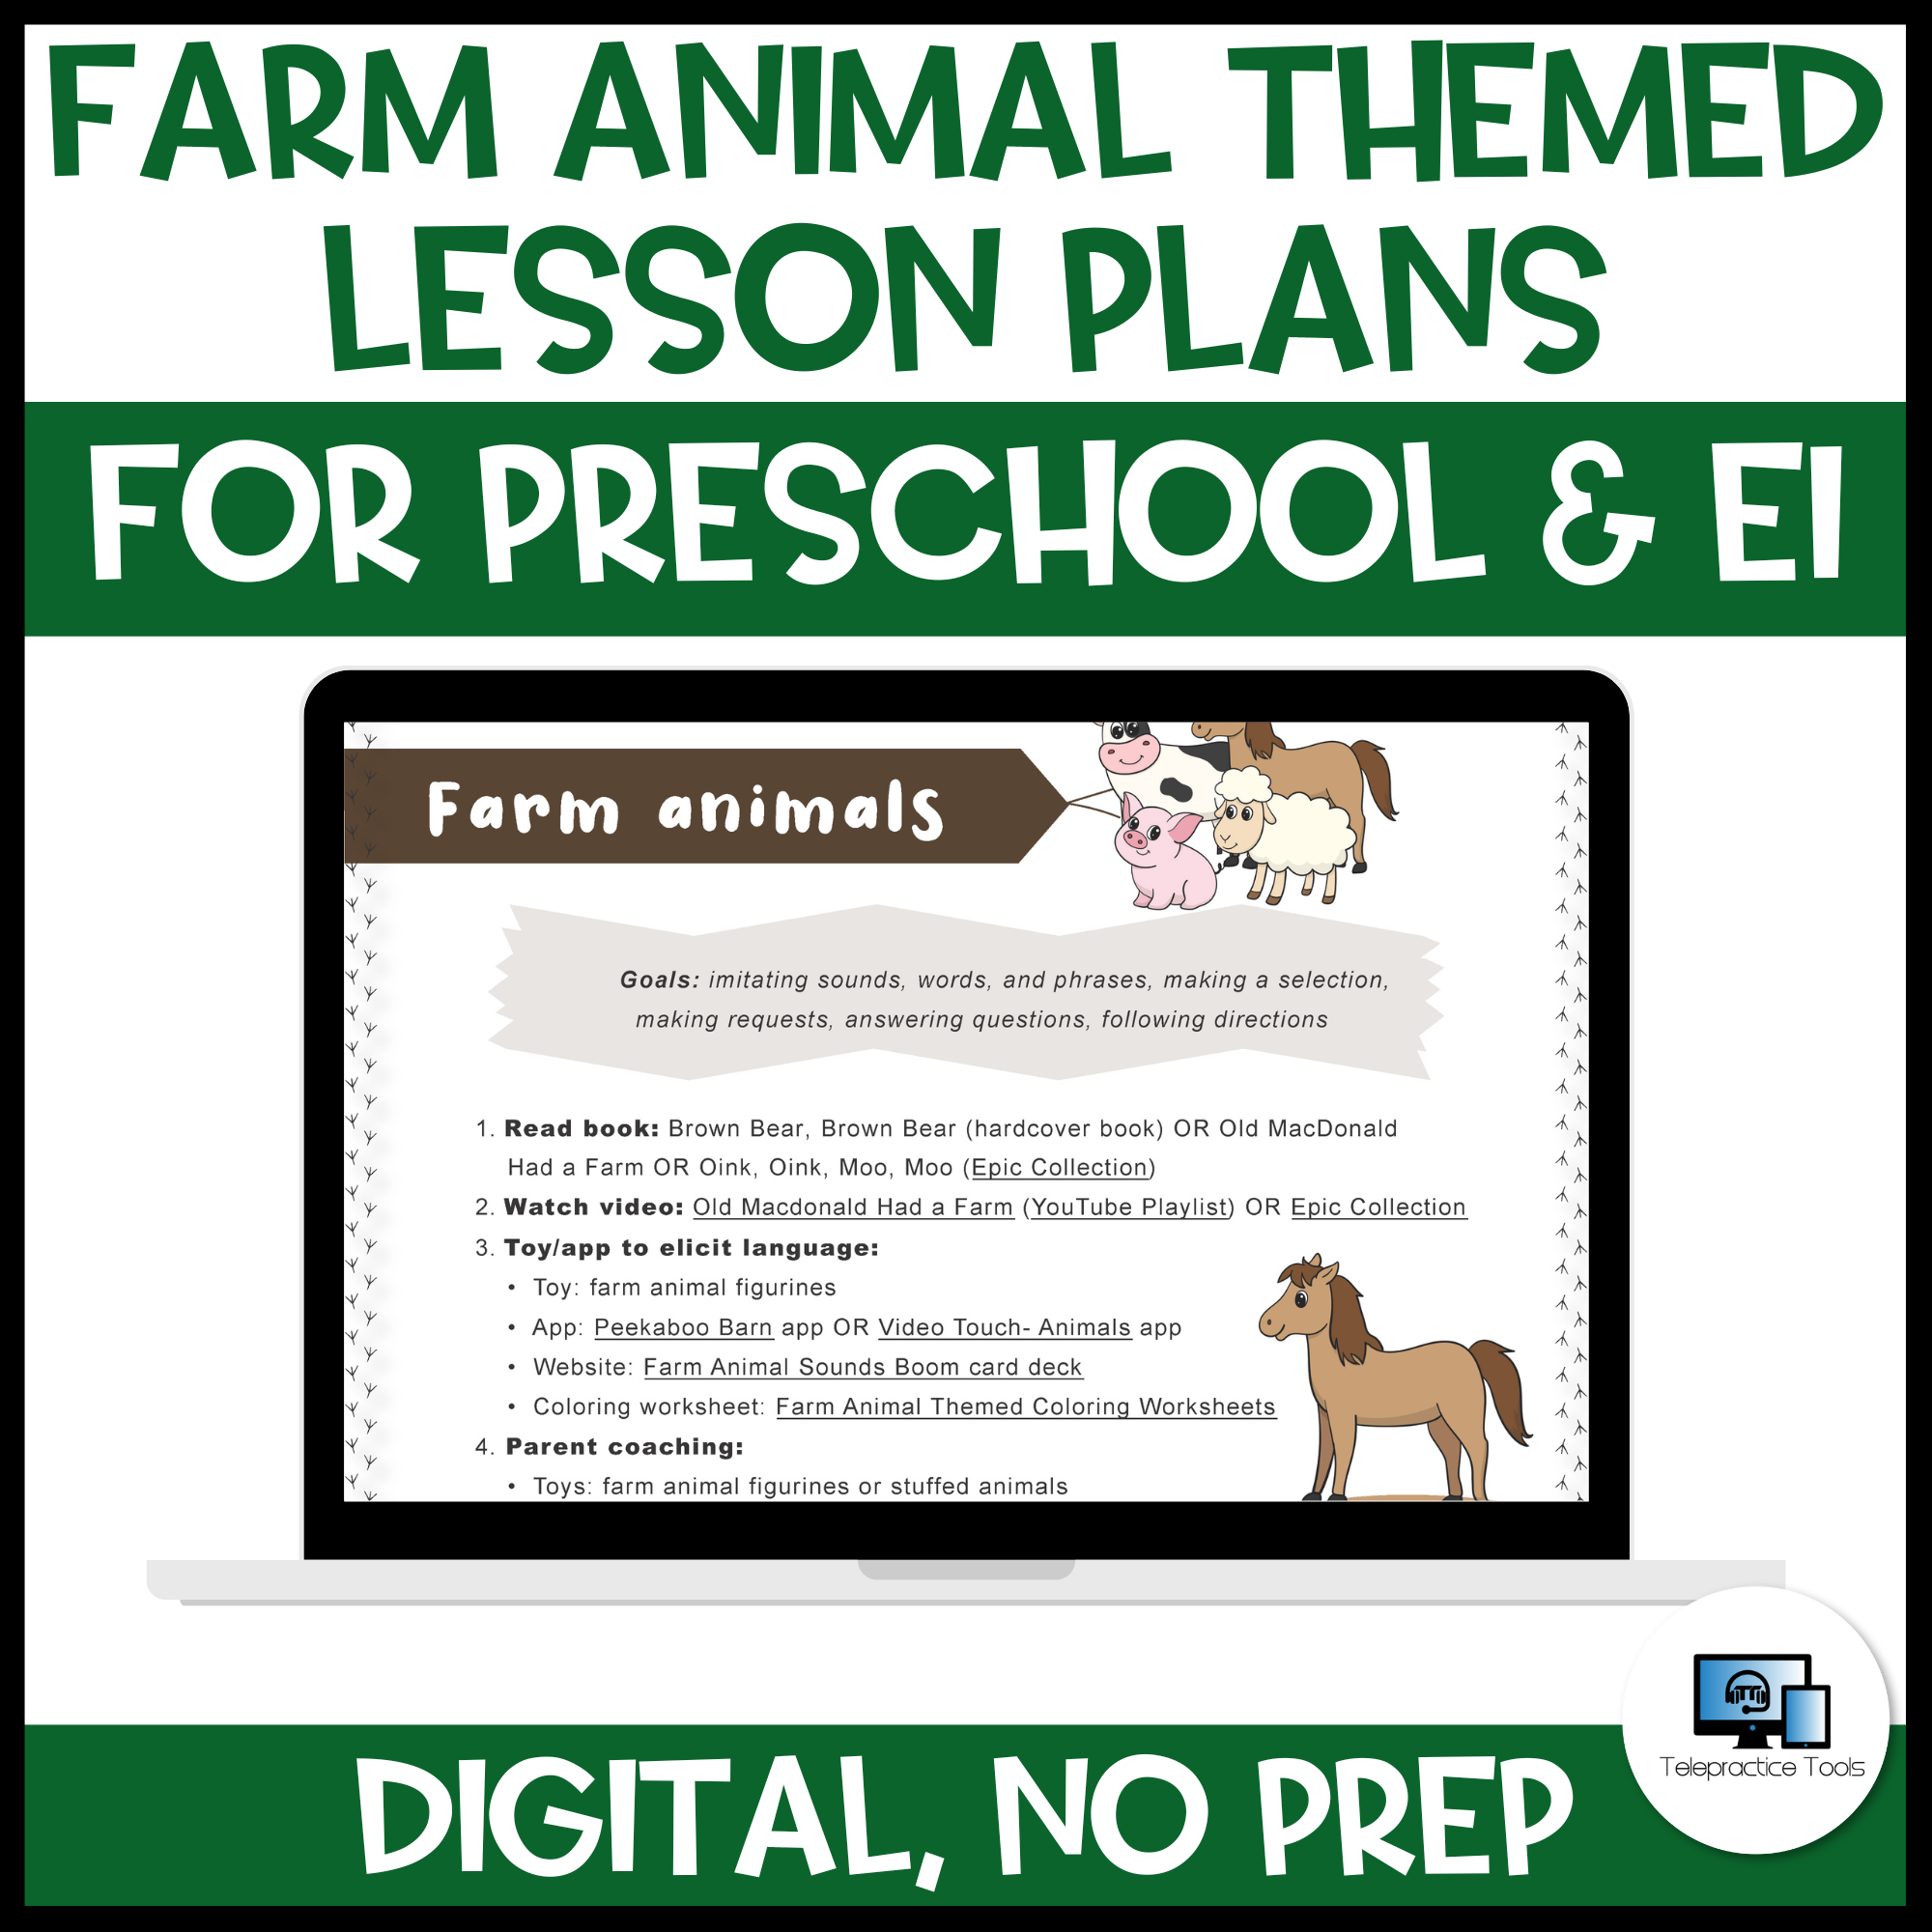 Farm Animal Themed Lesson Plans » Telepractice Tools